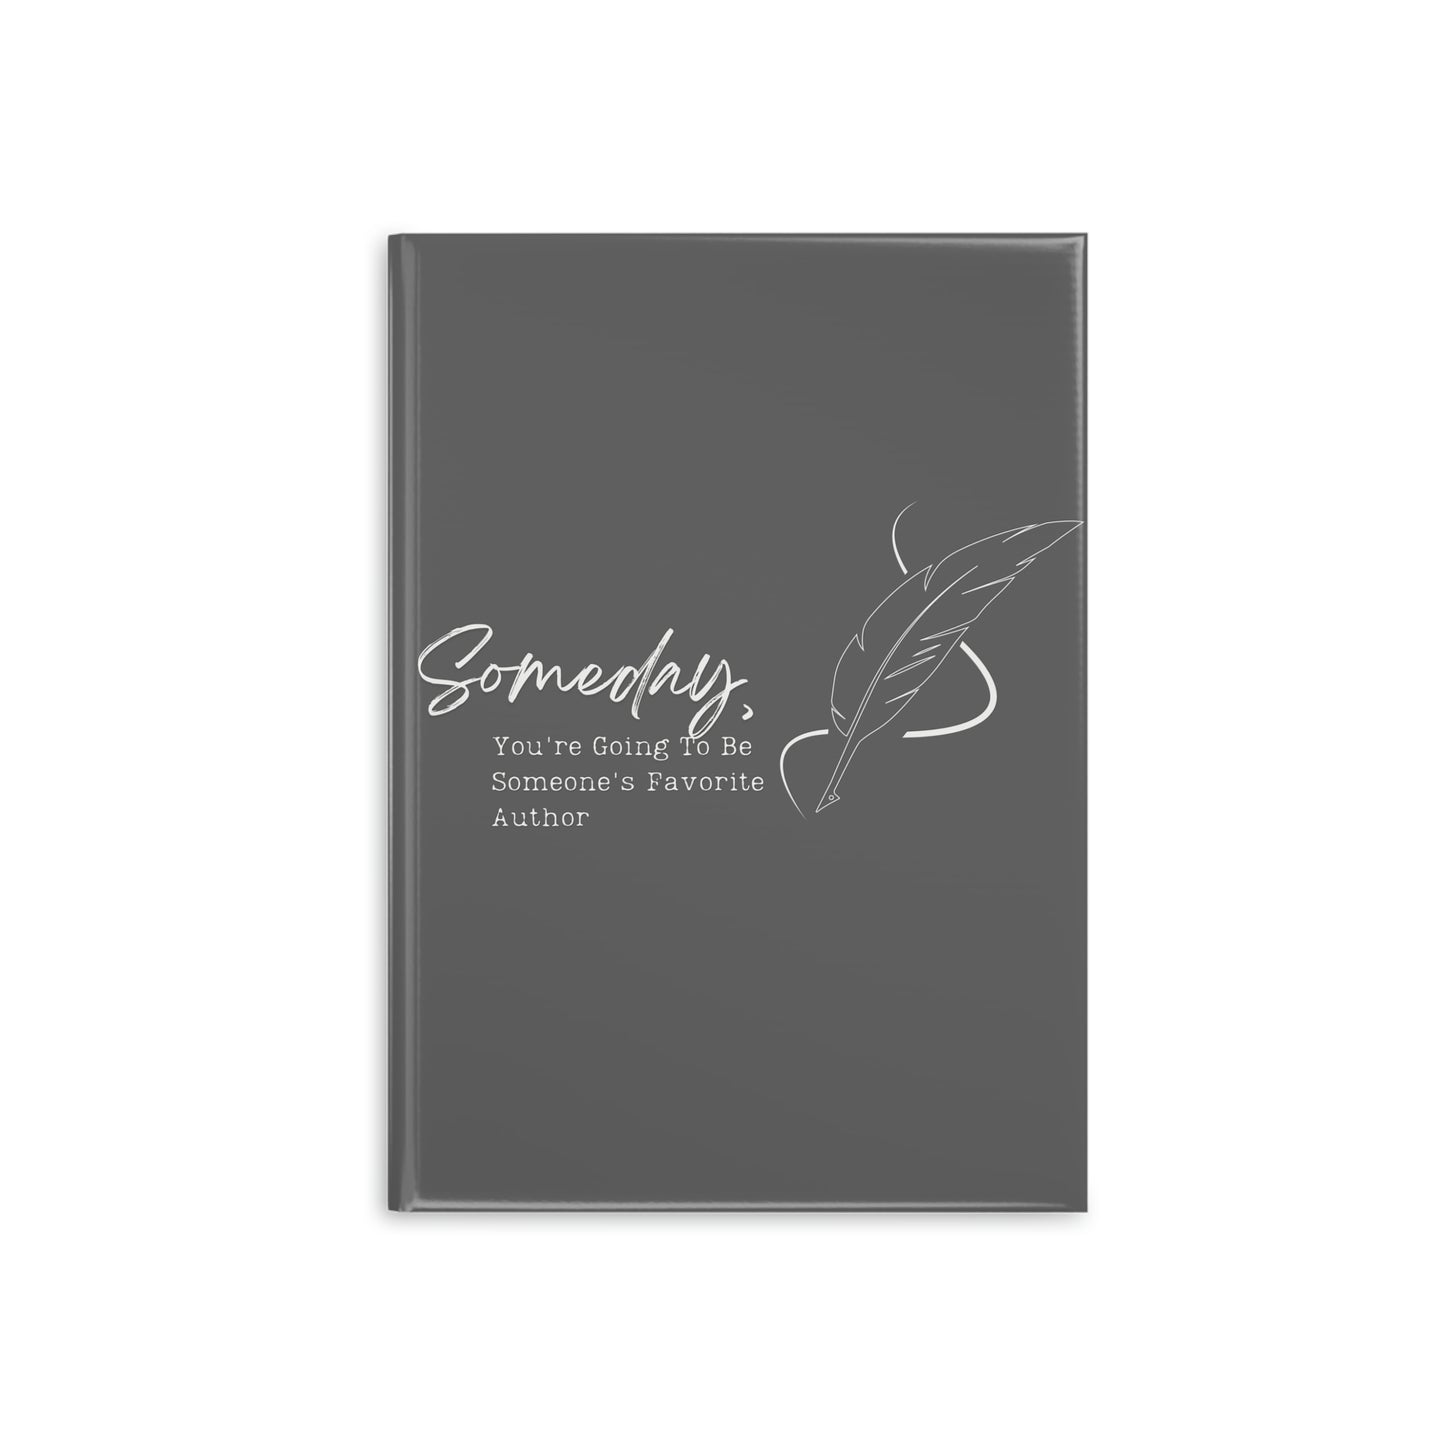 Someday, you're going to be someone's favorite author // Write Out Loud // Hardcover Notebook with Puffy Covers (Gray)